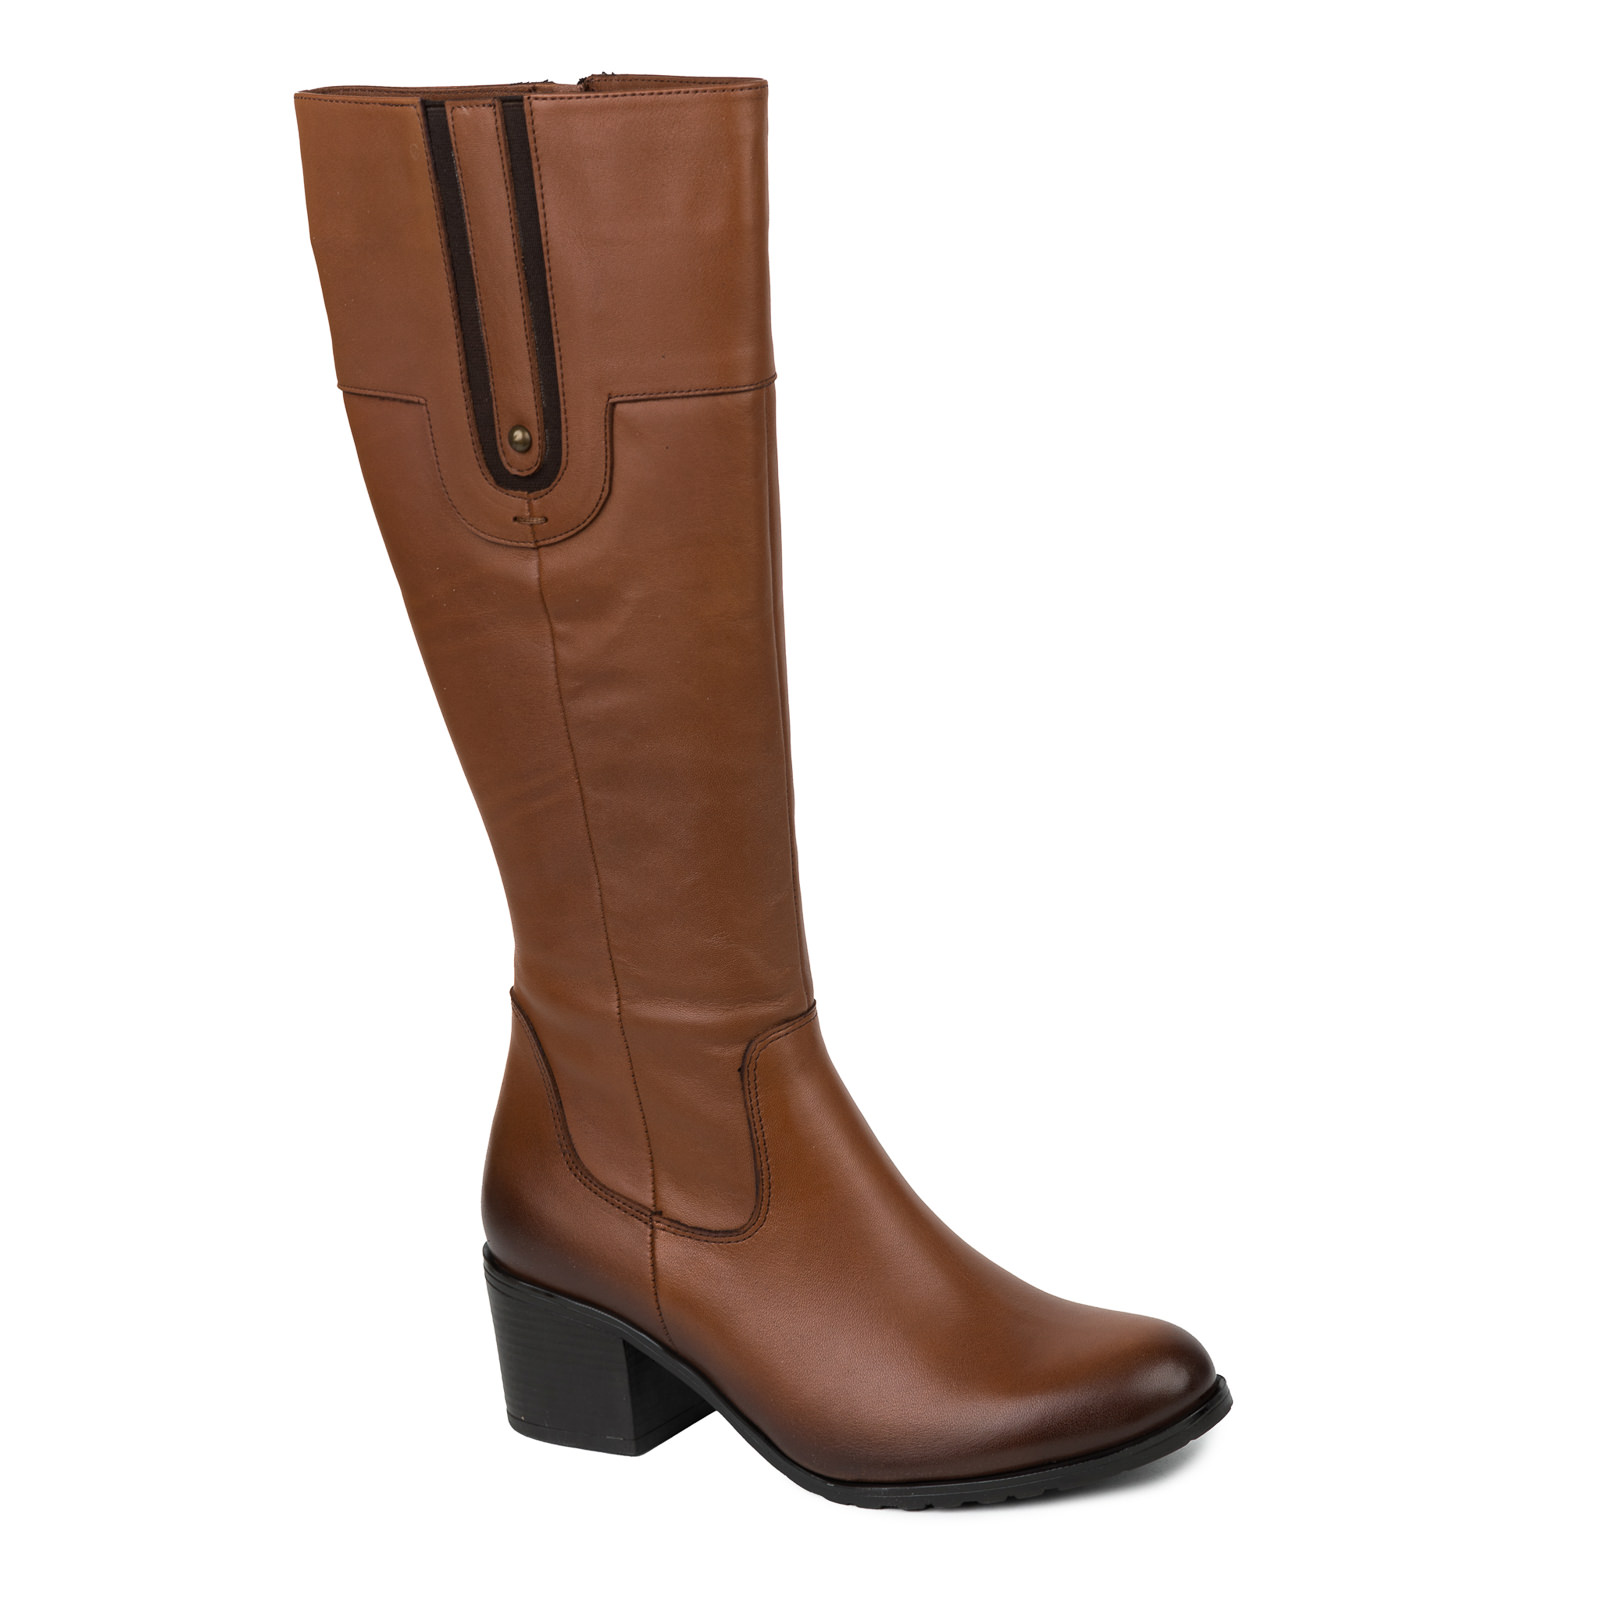 Leather boots B148 - CAMEL